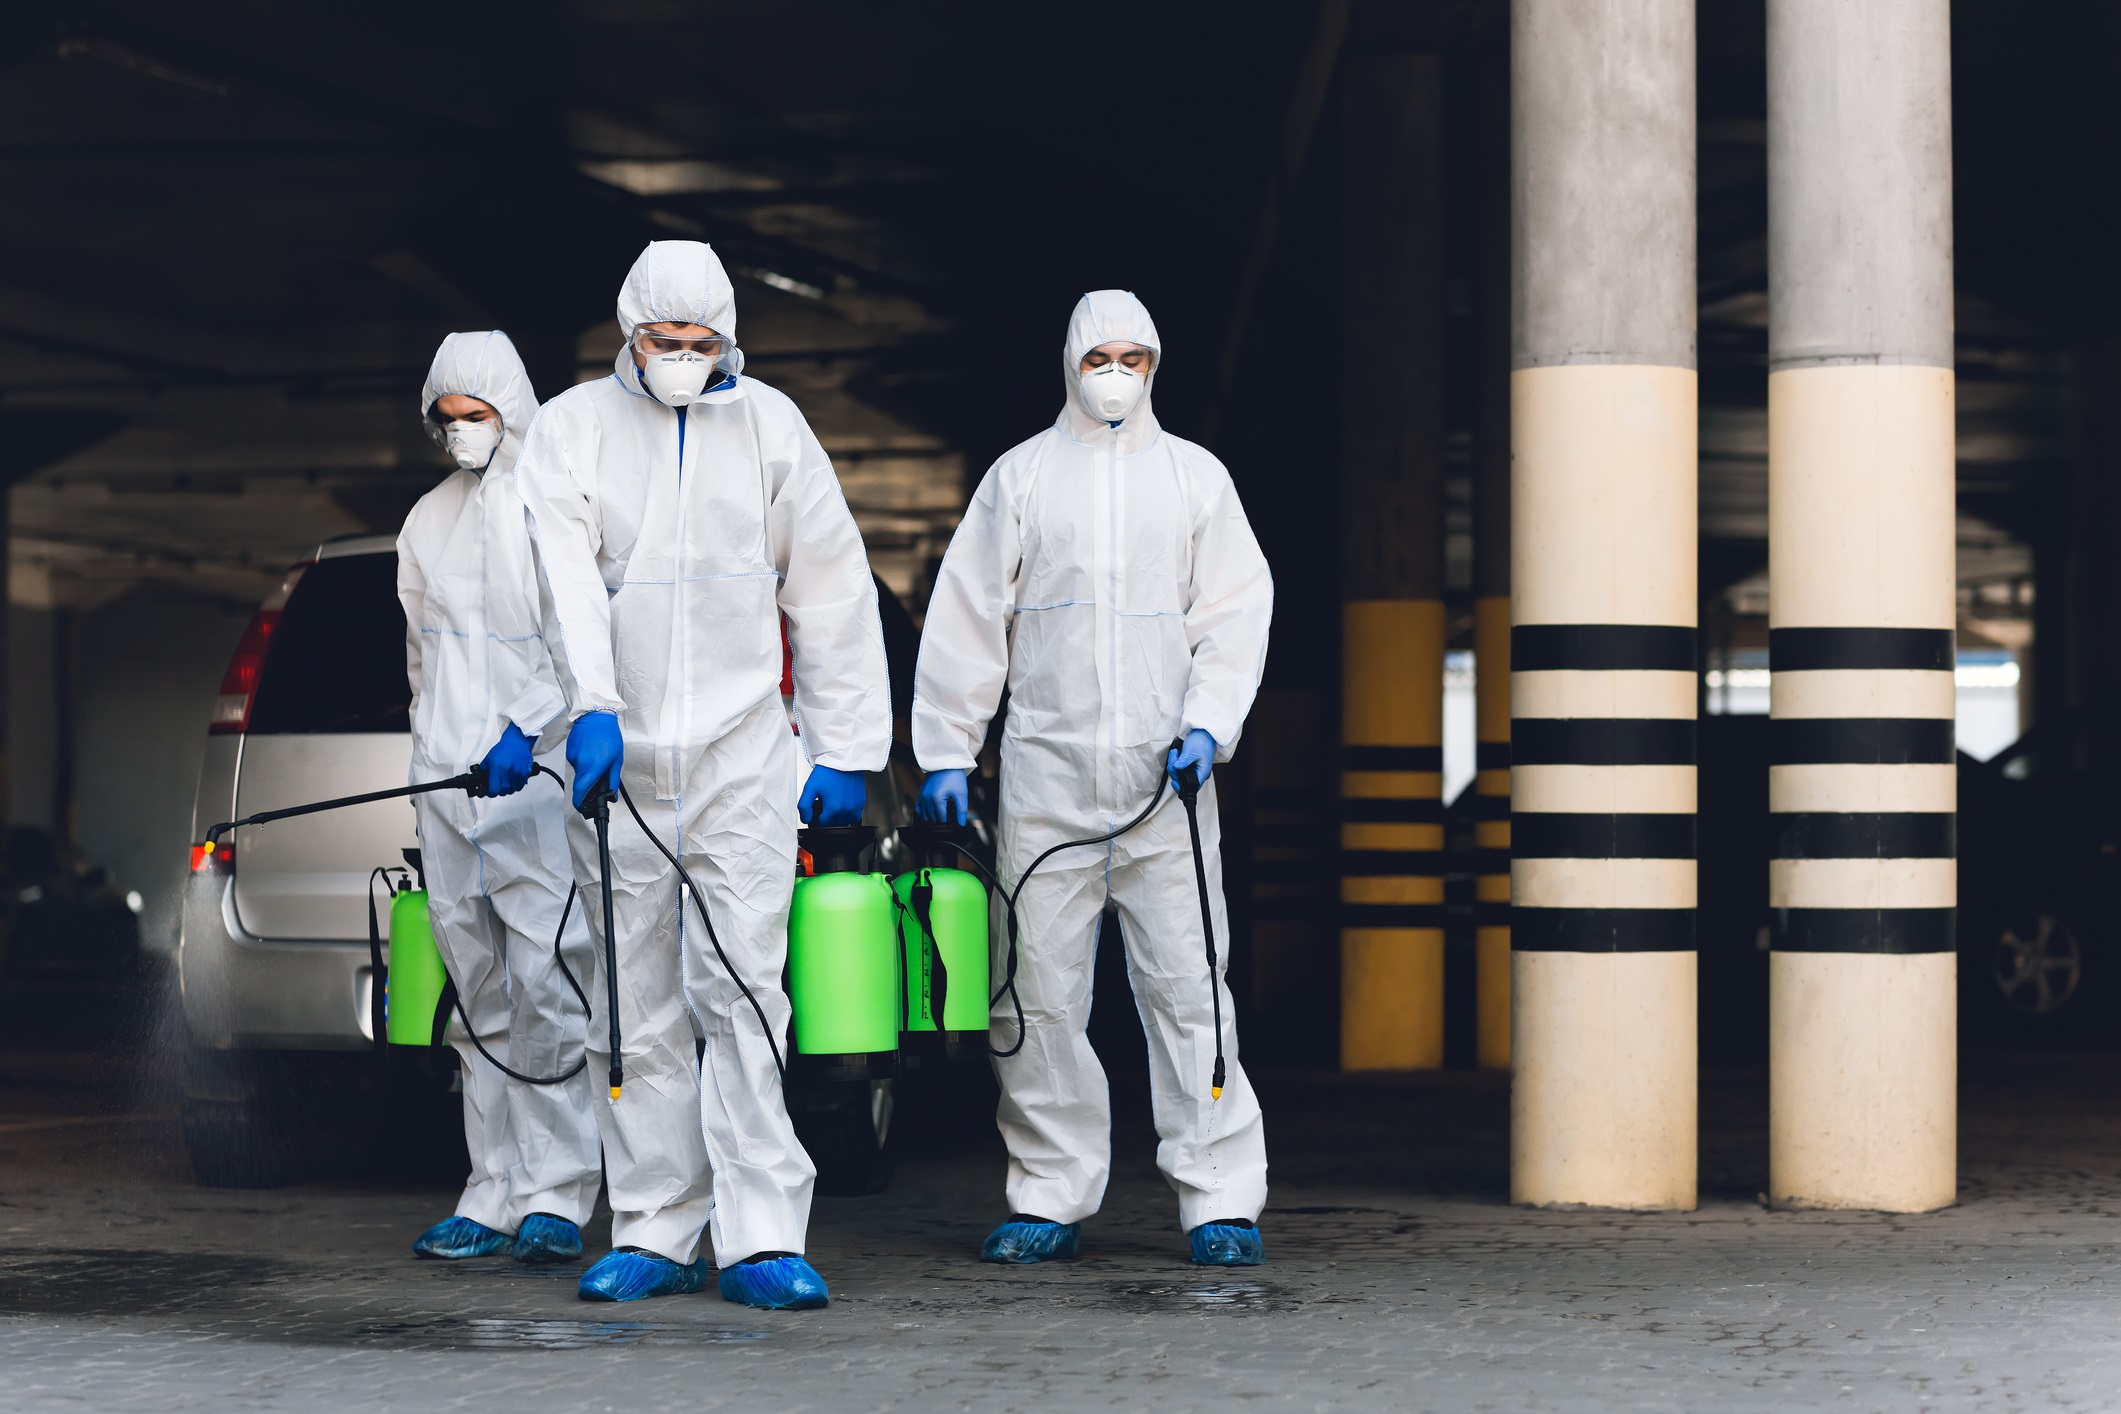 Medical workers in hazmat suits holding spray bottles with disinfecting chemicals